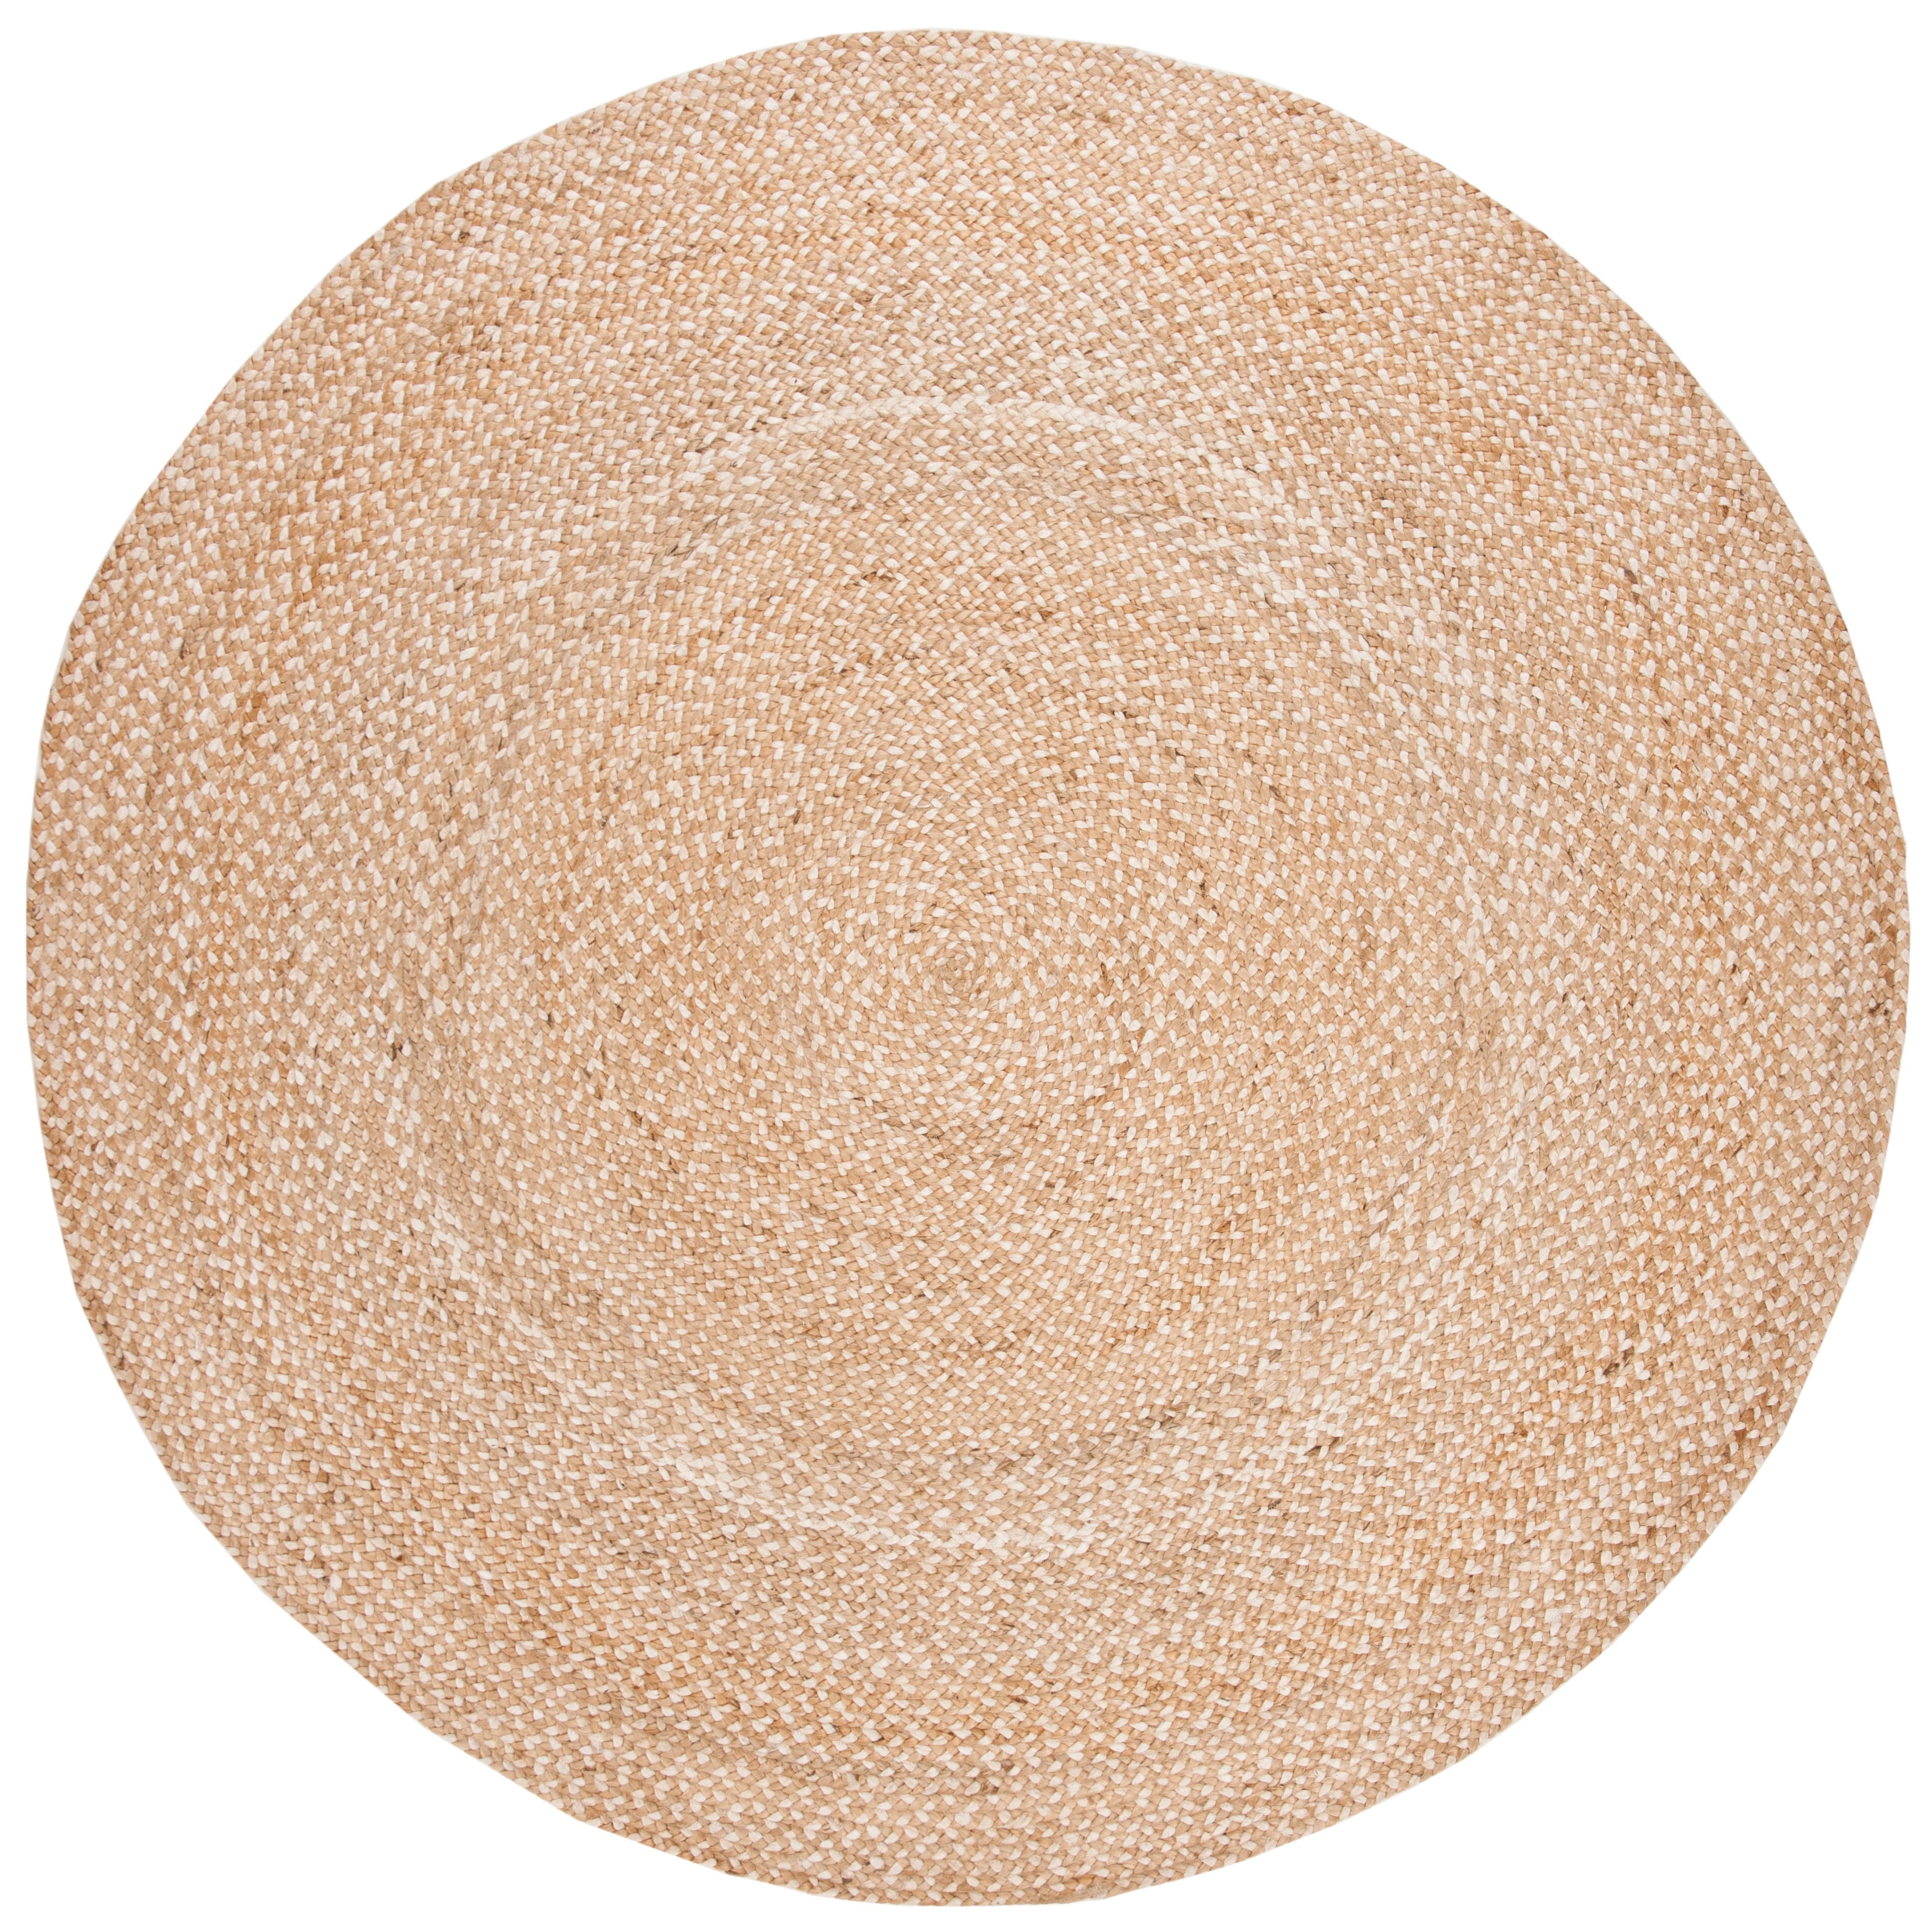 https://ak1.ostkcdn.com/images/products/is/images/direct/7a39c783815641ccc6185768d73679bd4beaee25/SAFAVIEH-Handmade-Natural-Fiber-Harmtine-Round-Jute-Rug.jpg